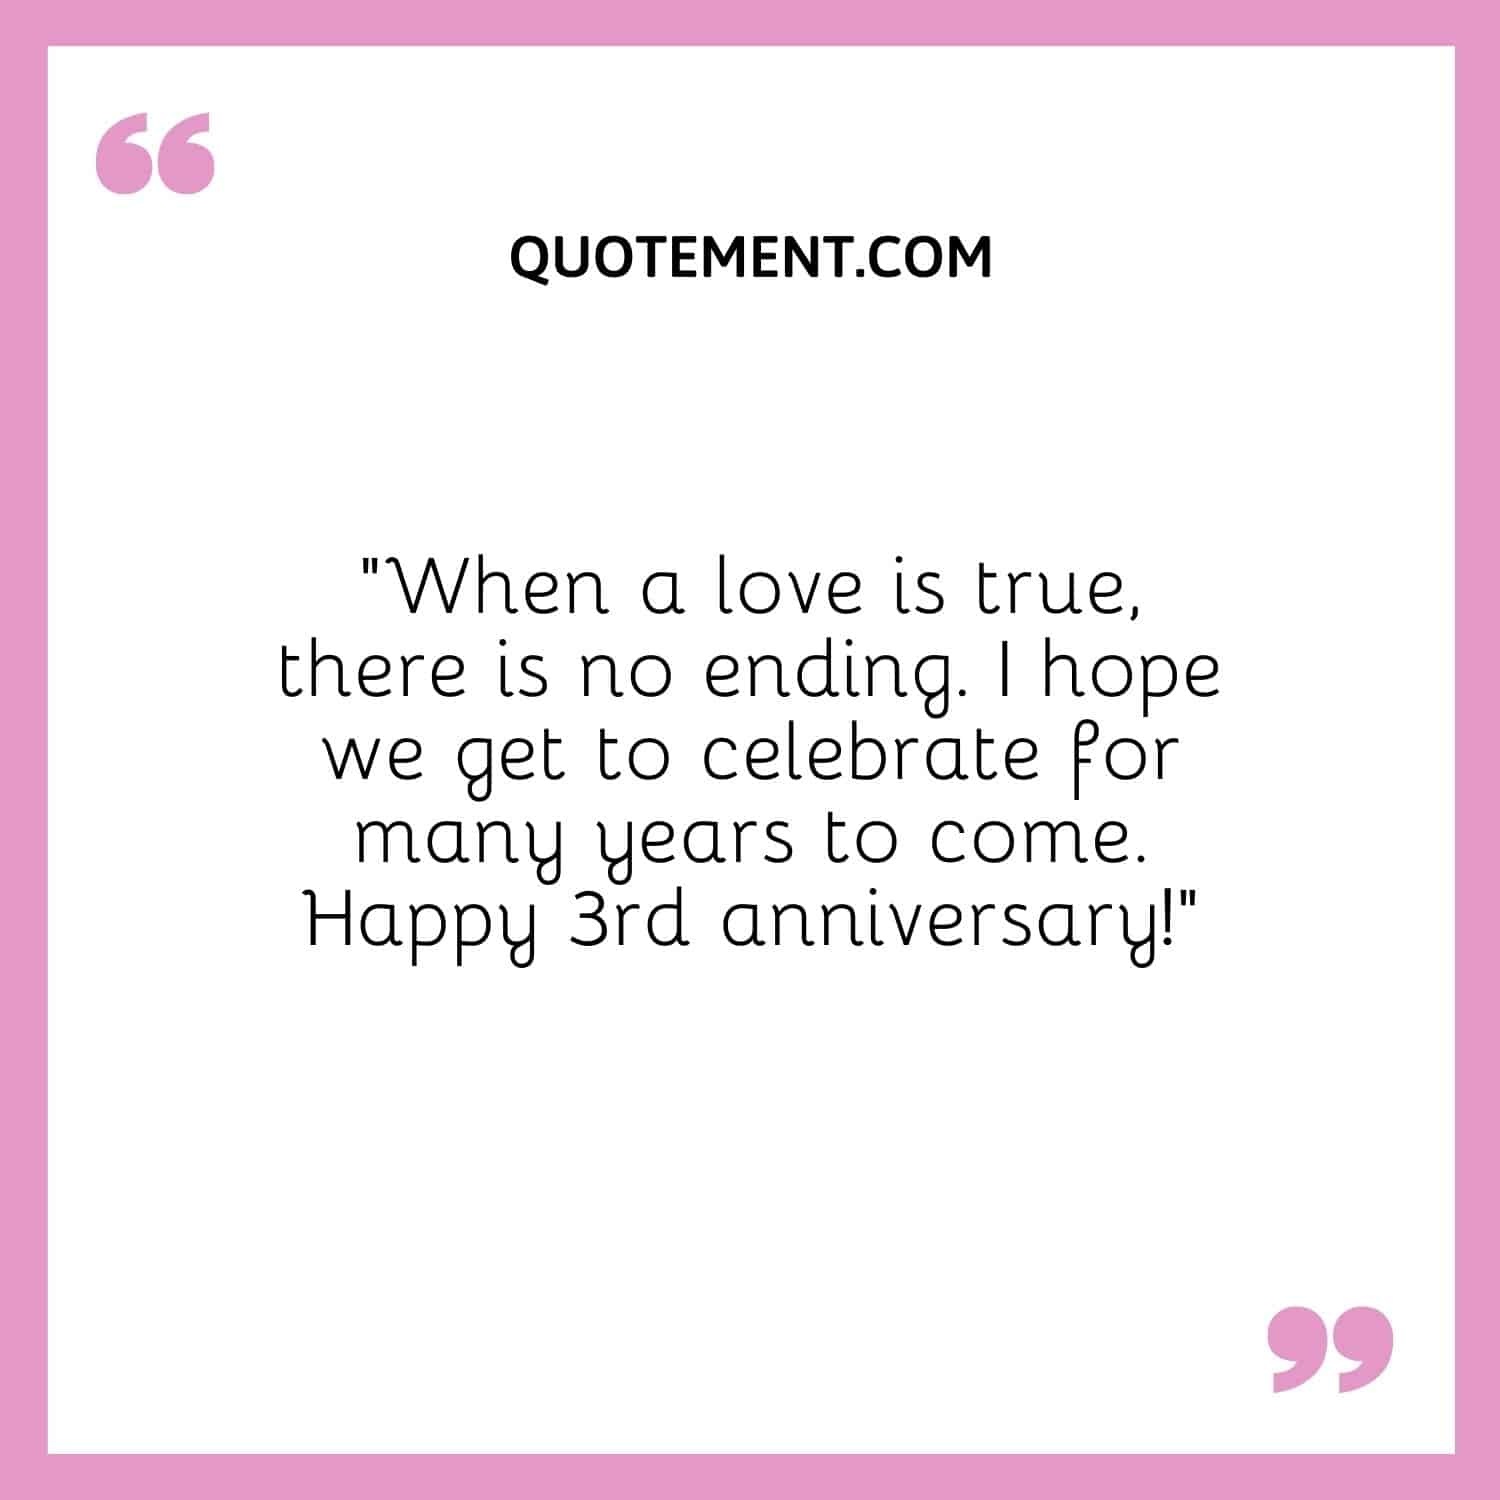 “When a love is true, there is no ending. I hope we get to celebrate for many years to come. Happy 3rd anniversary!”